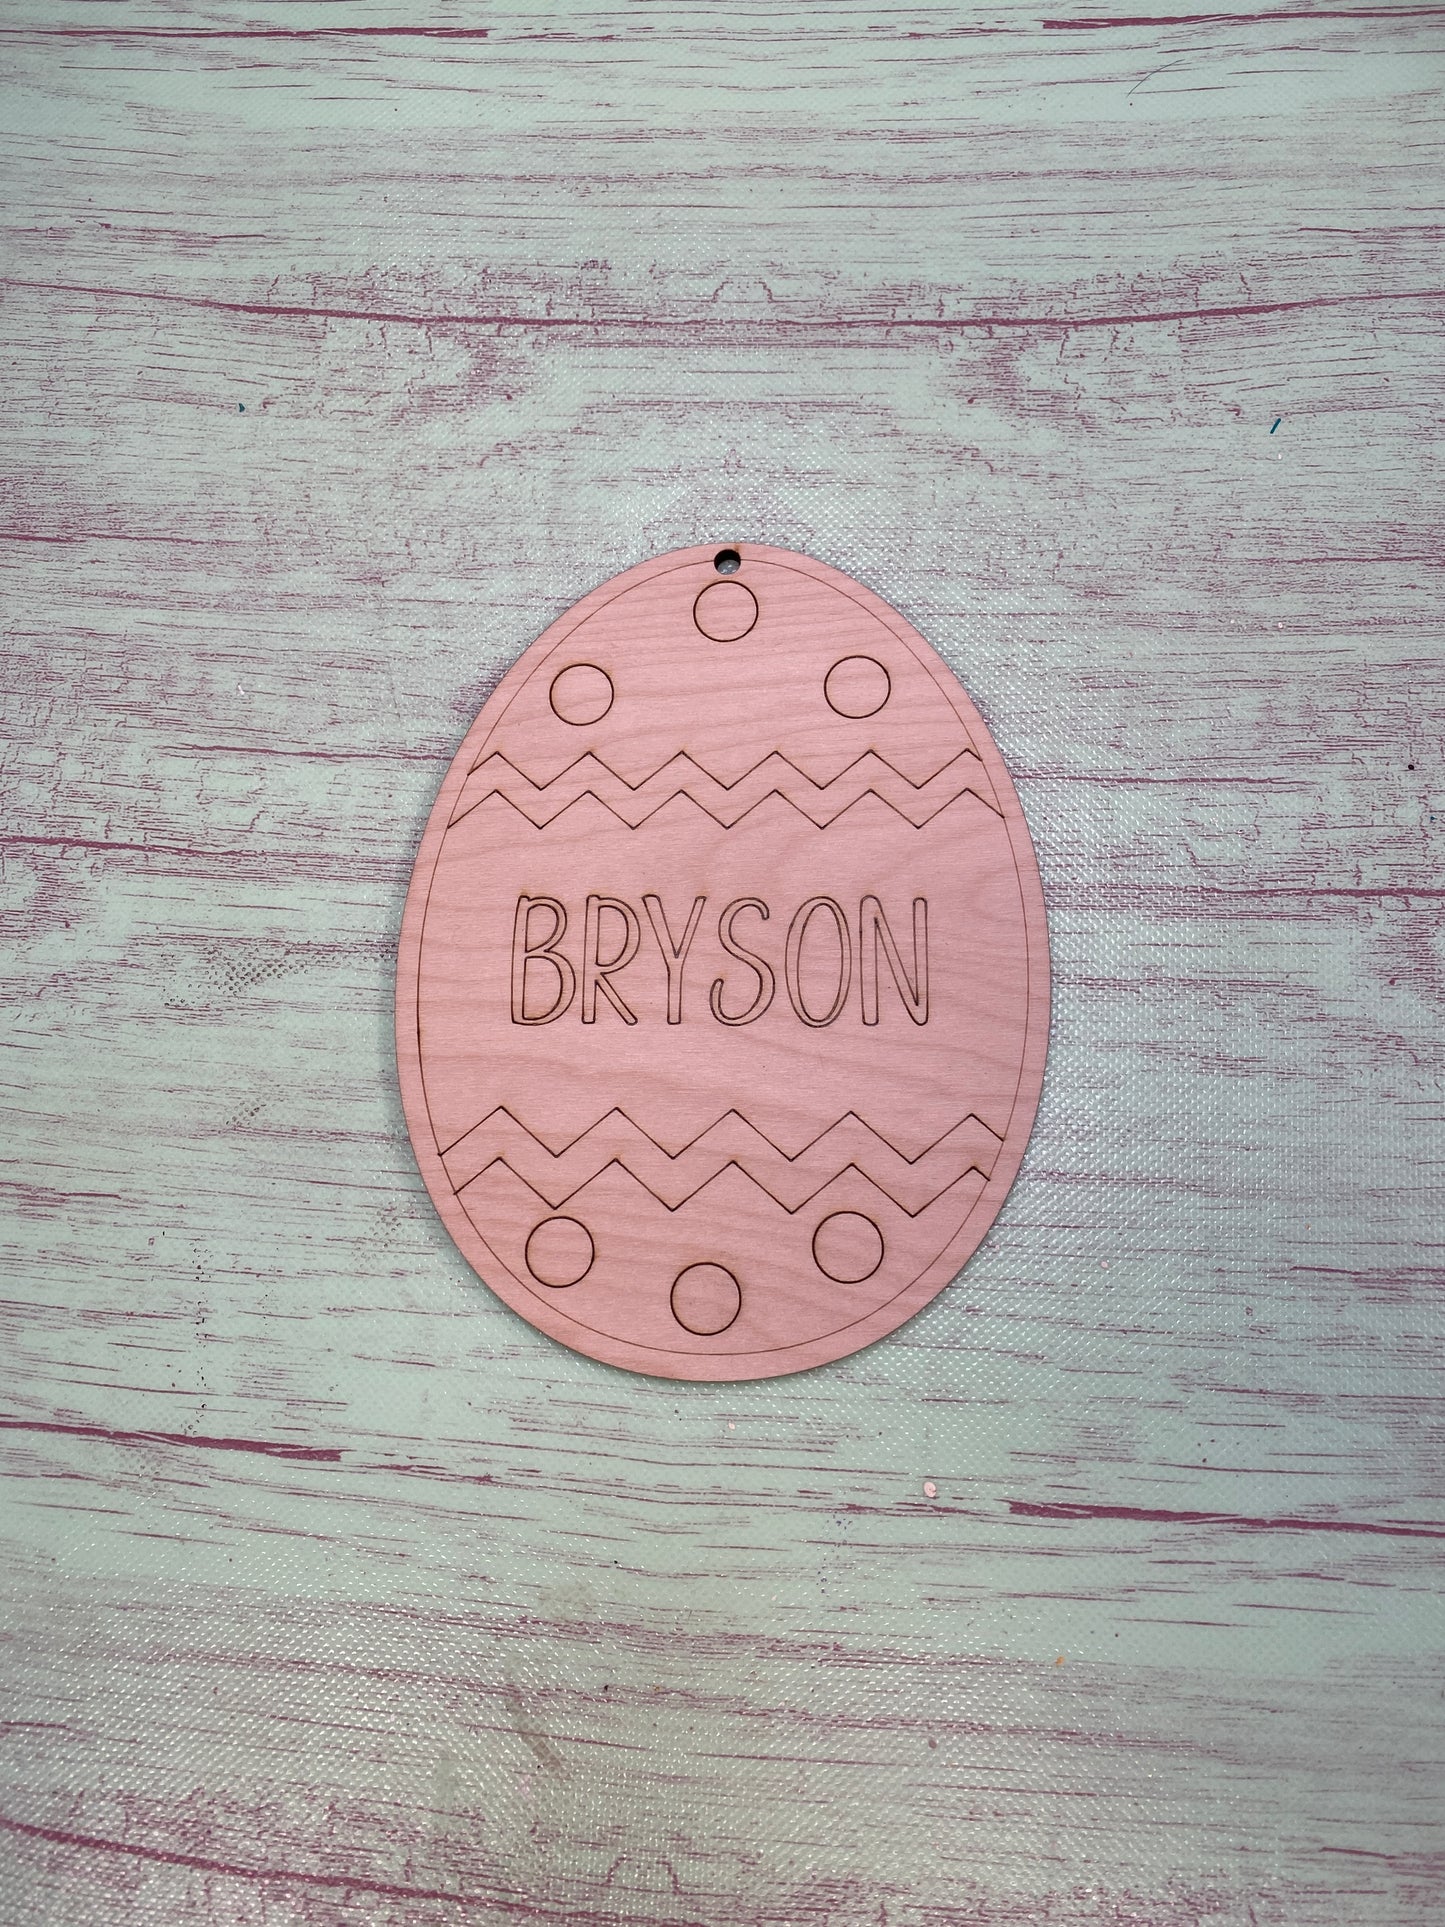 Easter Basket Tags / Personalized Eggs DIY Laser Cut / Engraved Wooden Blank